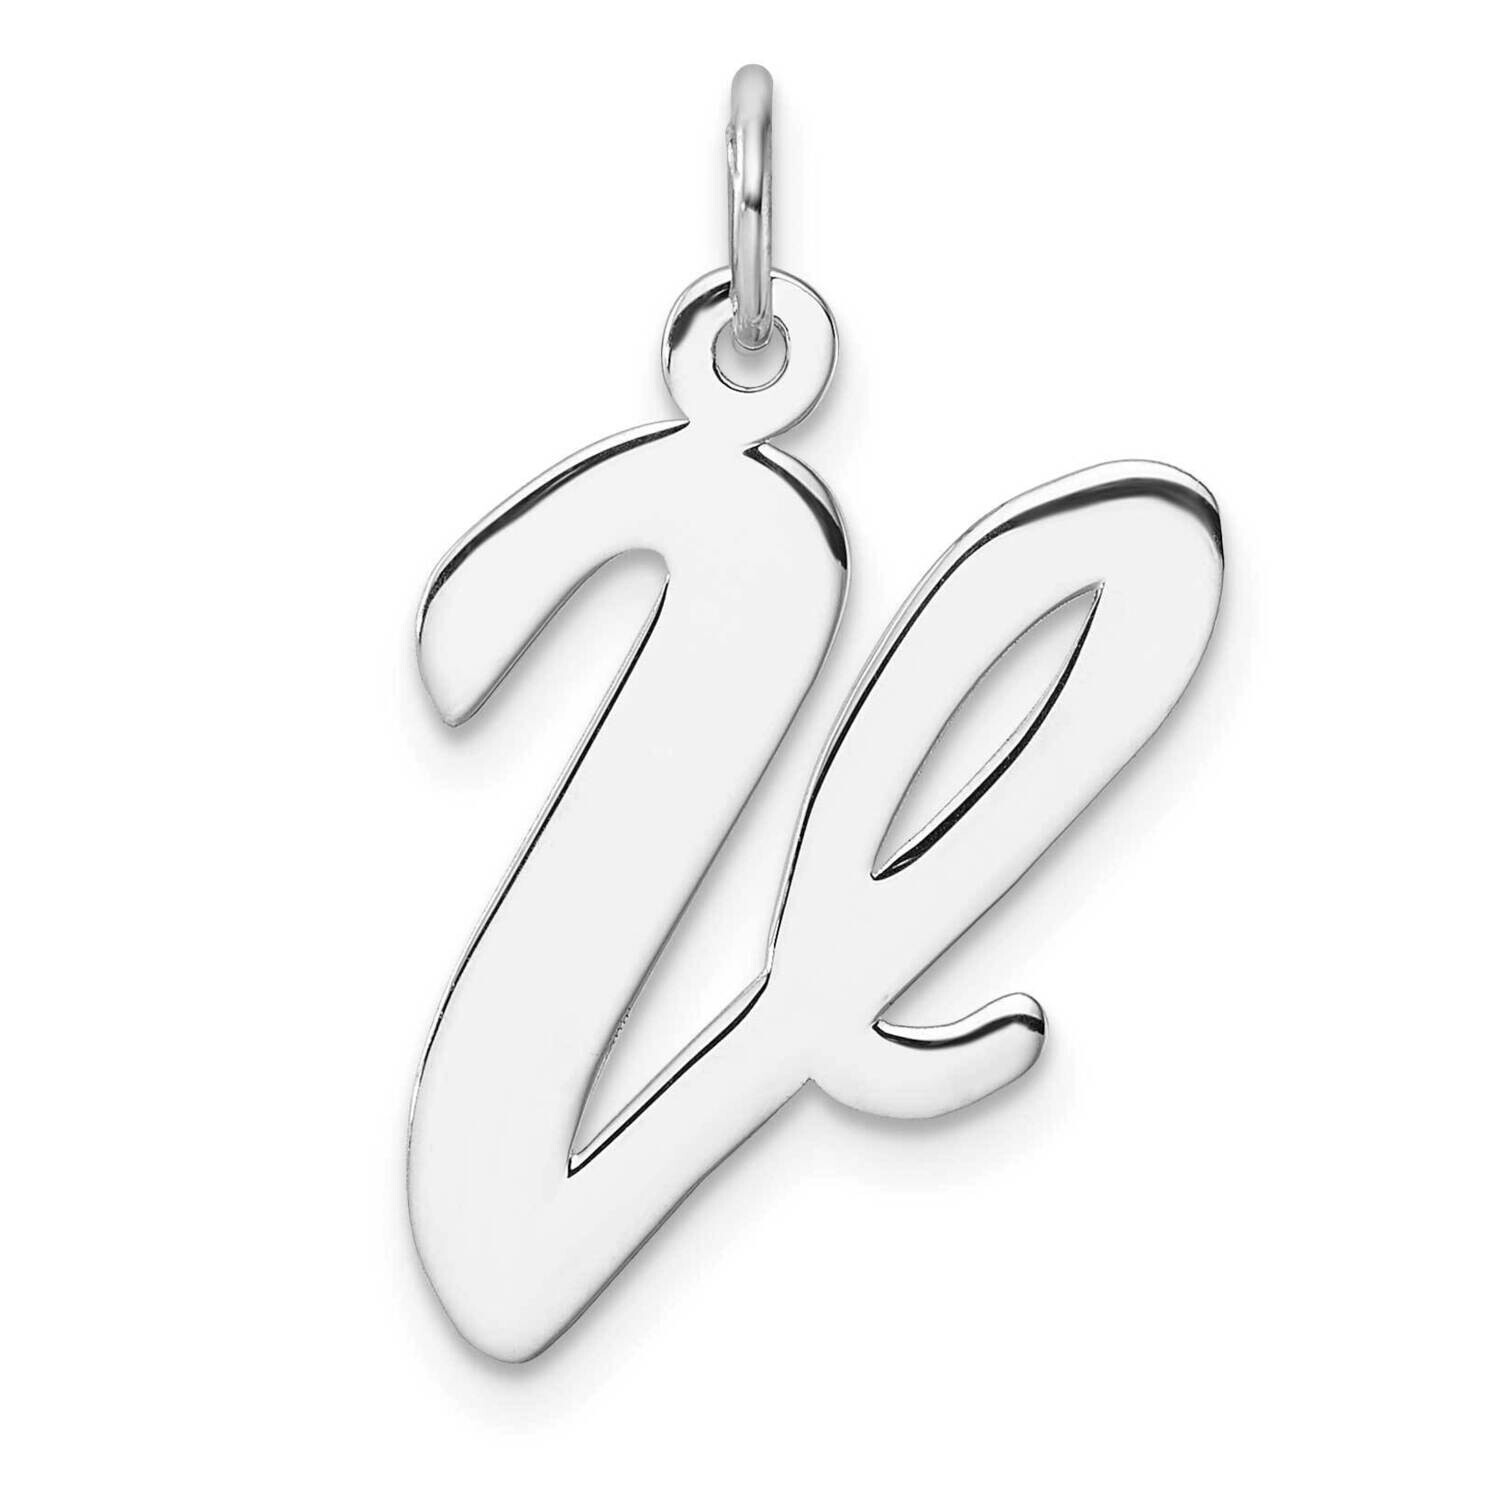 Large Script Letter V Initial Charm Sterling Silver Rhodium-Plated QC11253V